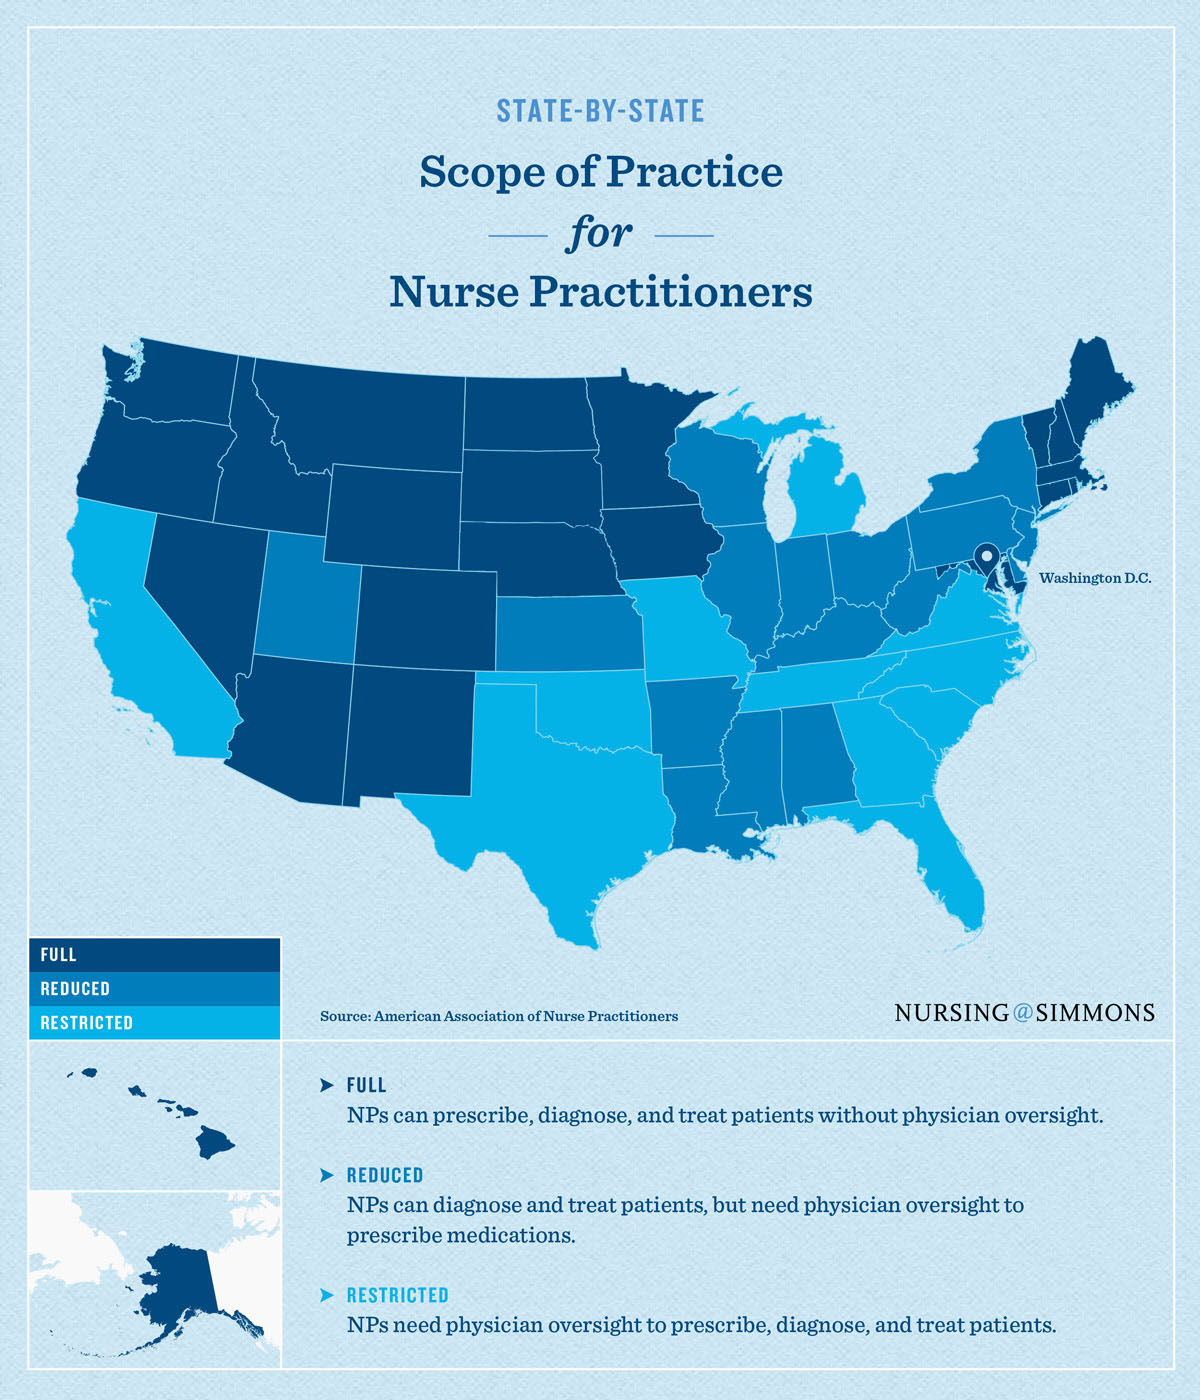 Where Can Nurse Practitioners Work Without Physician Supervision